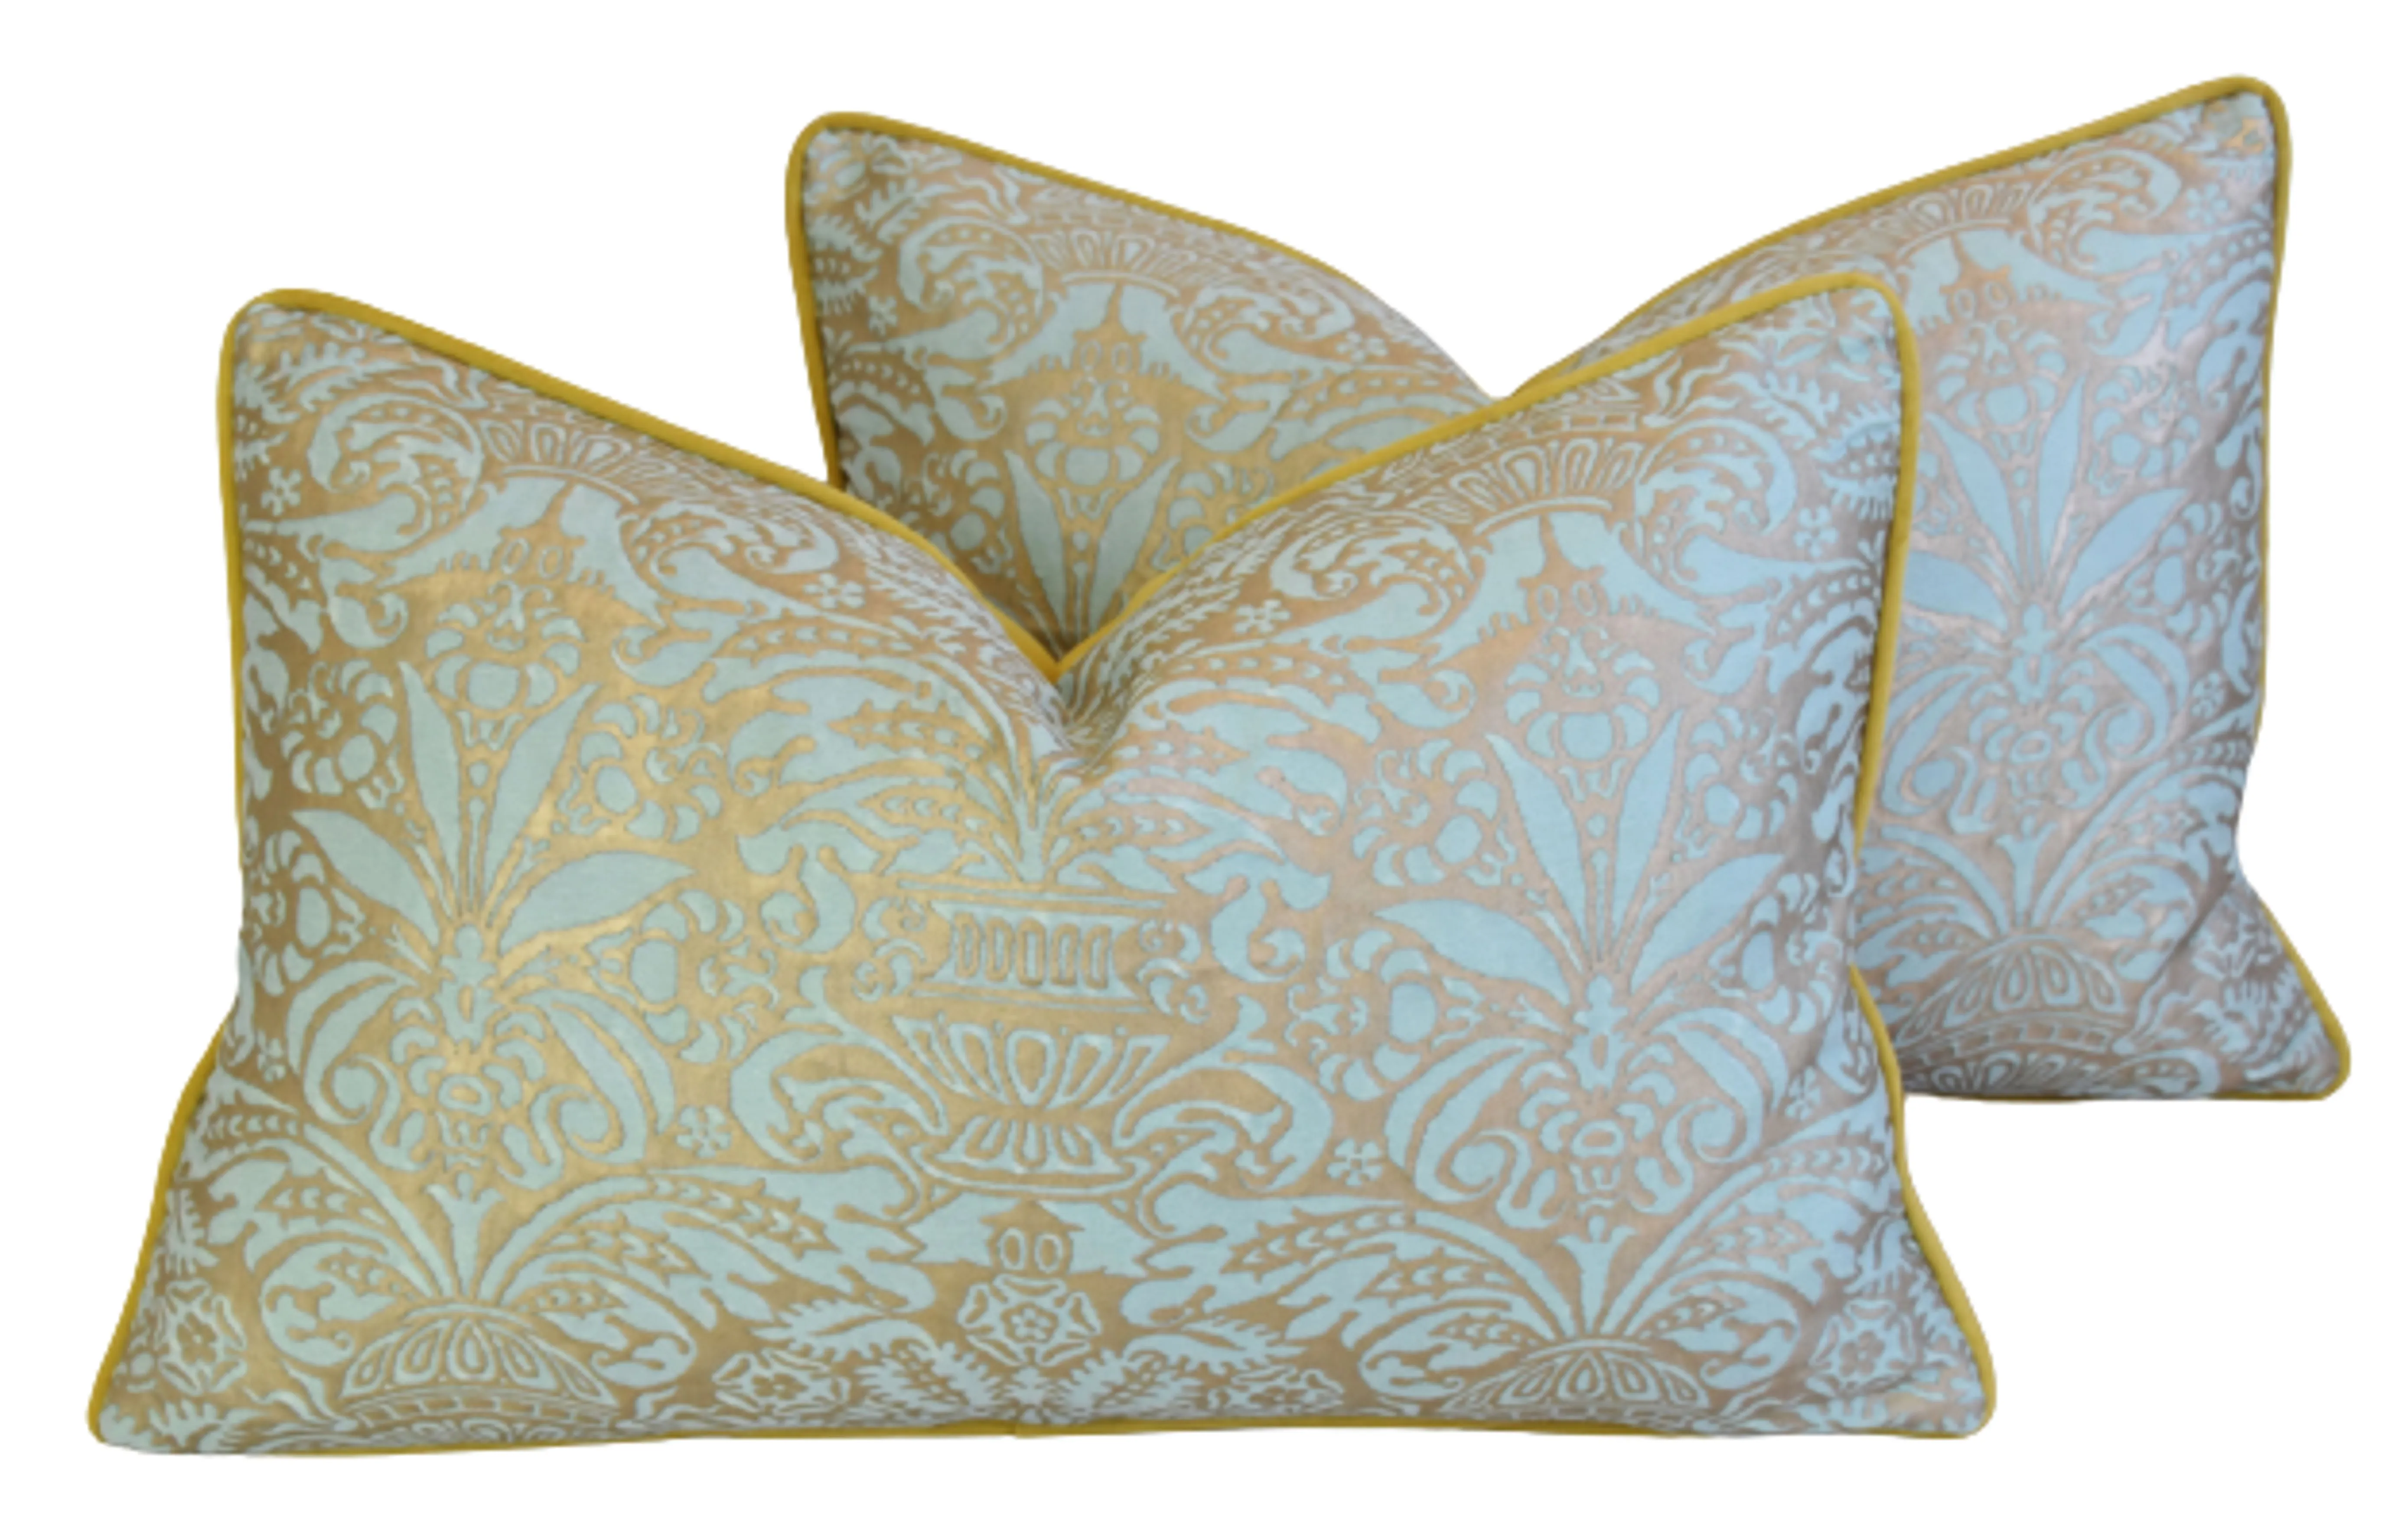 Mariano Fortuny Campanelle Pillows - Set of 2